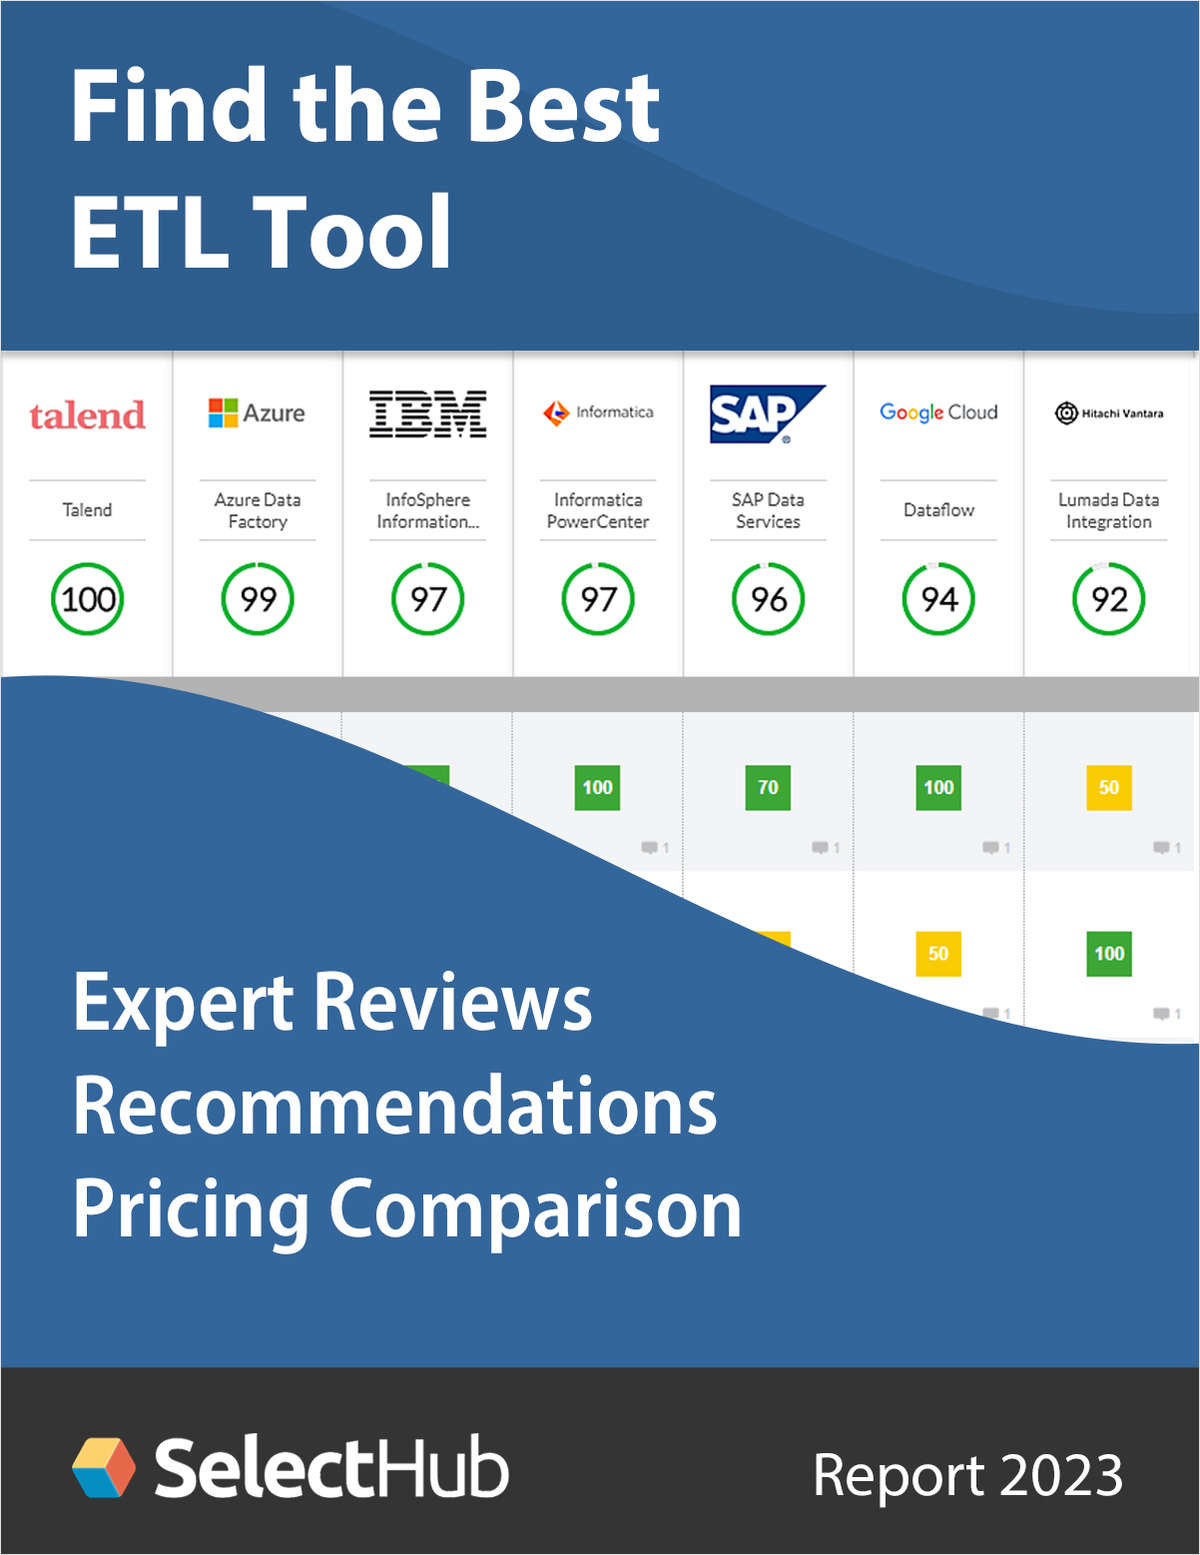 Find the Best ETL Tool 2023--Expert Analysis, Recommendations & Pricing